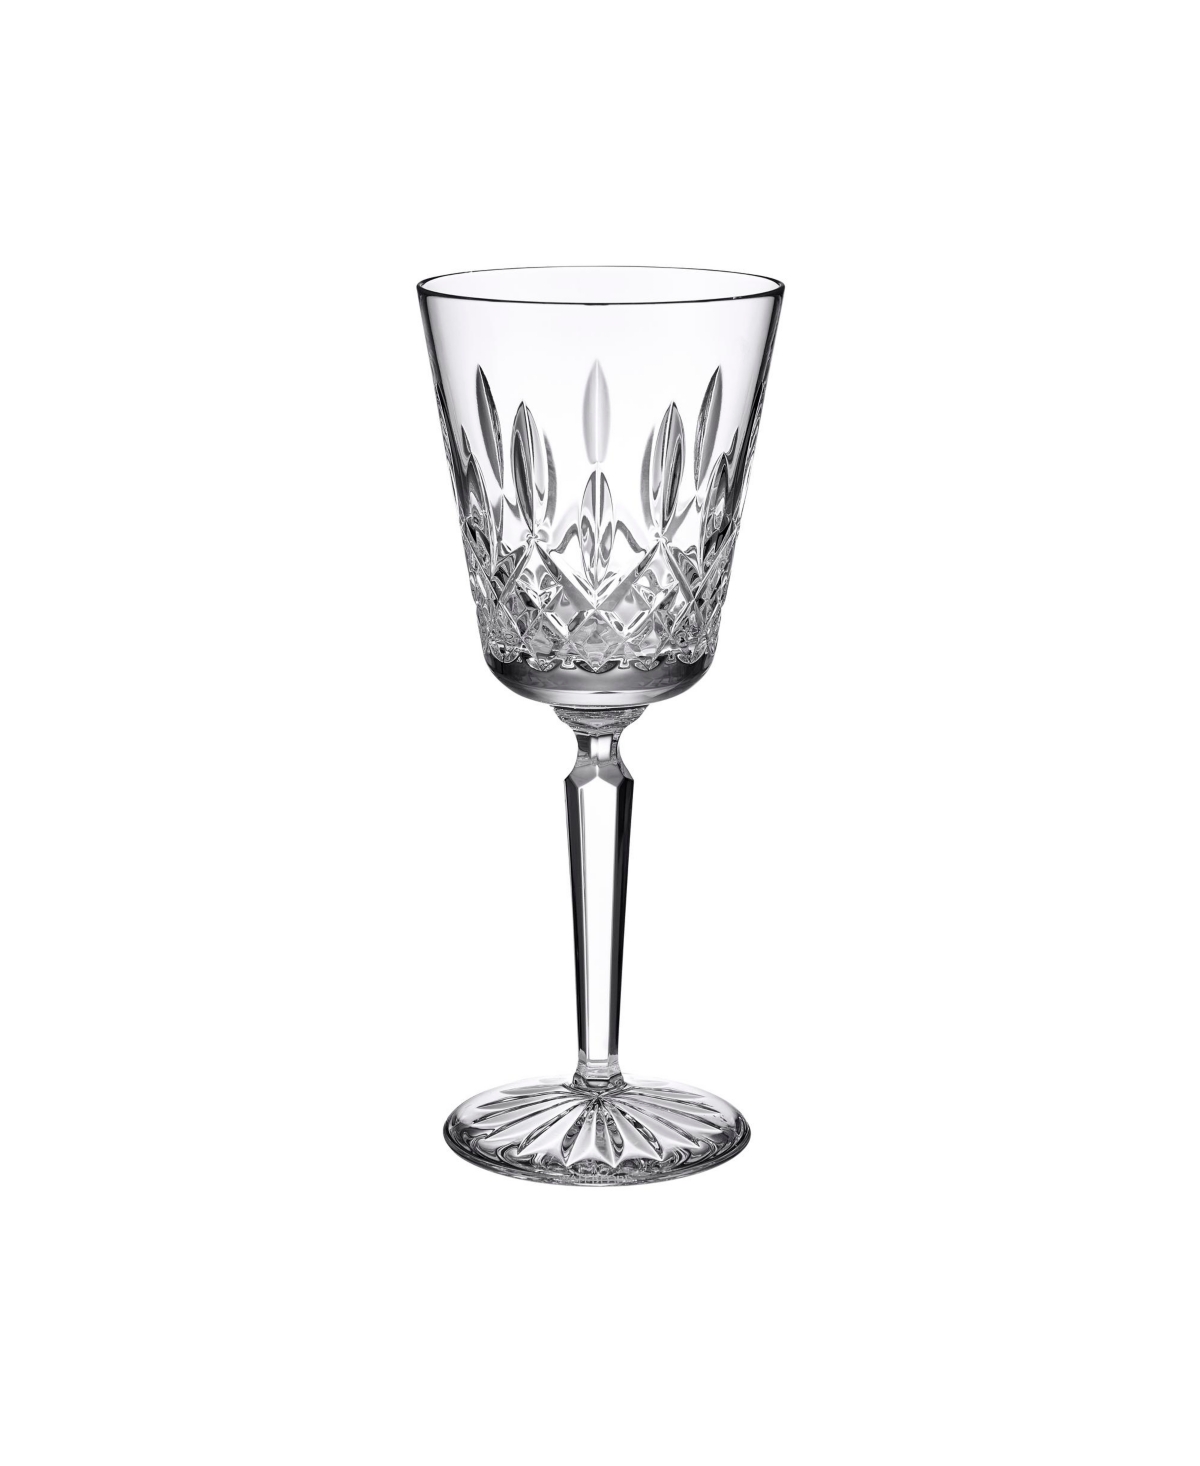 Waterford Lismore Tall Large Goblet, 14 oz In Clear